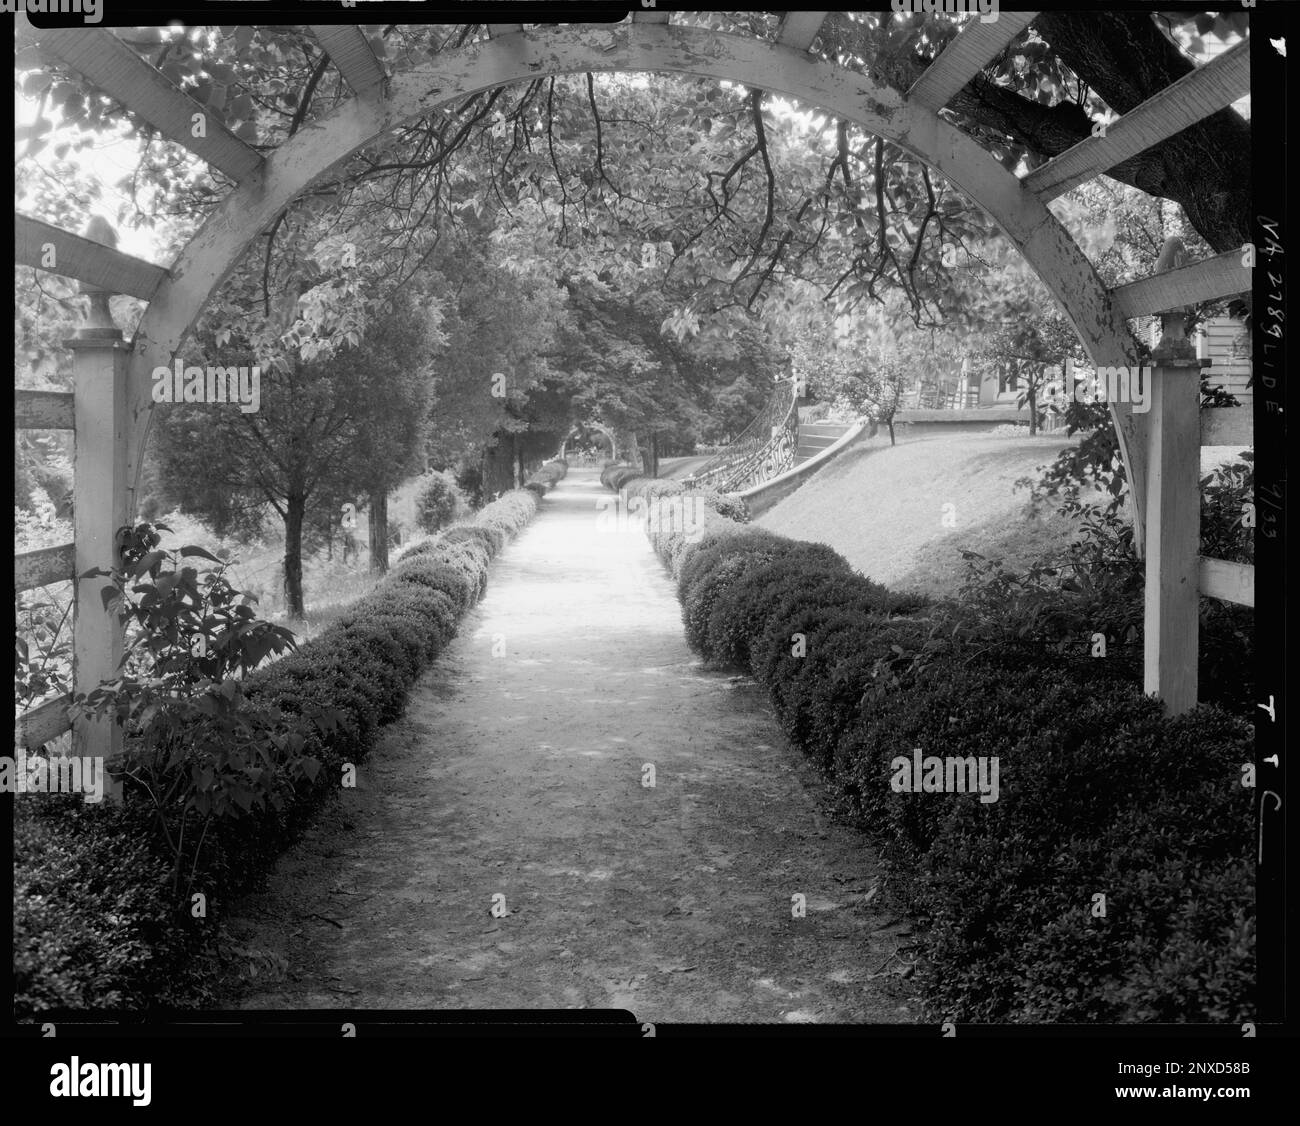 Belmont, Falmouth, Stafford County, Virginia. Carnegie Survey of the Architecture of the South. United States  Virginia  Stafford County  Falmouth, Arbors , Bowers, Trails & paths, Gardens. Stock Photo